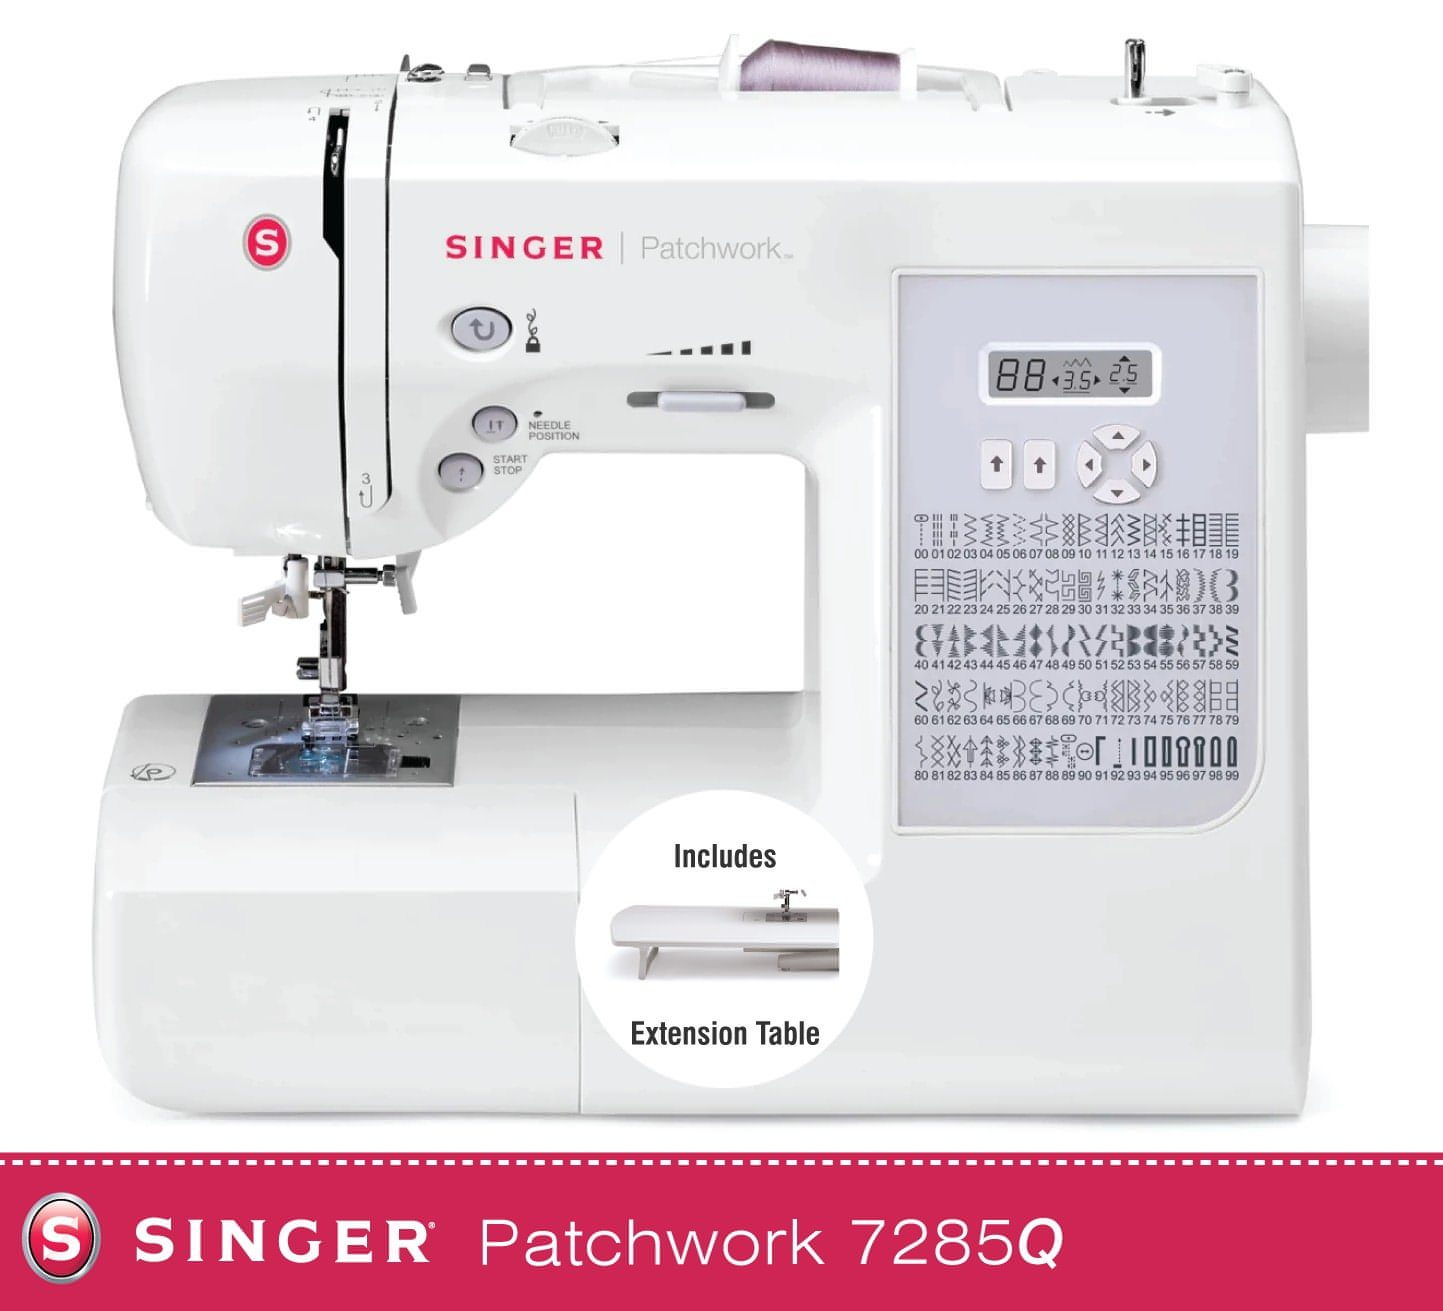 Singer 7285Q Patchwork Sewing Machine with Quilting Extension table